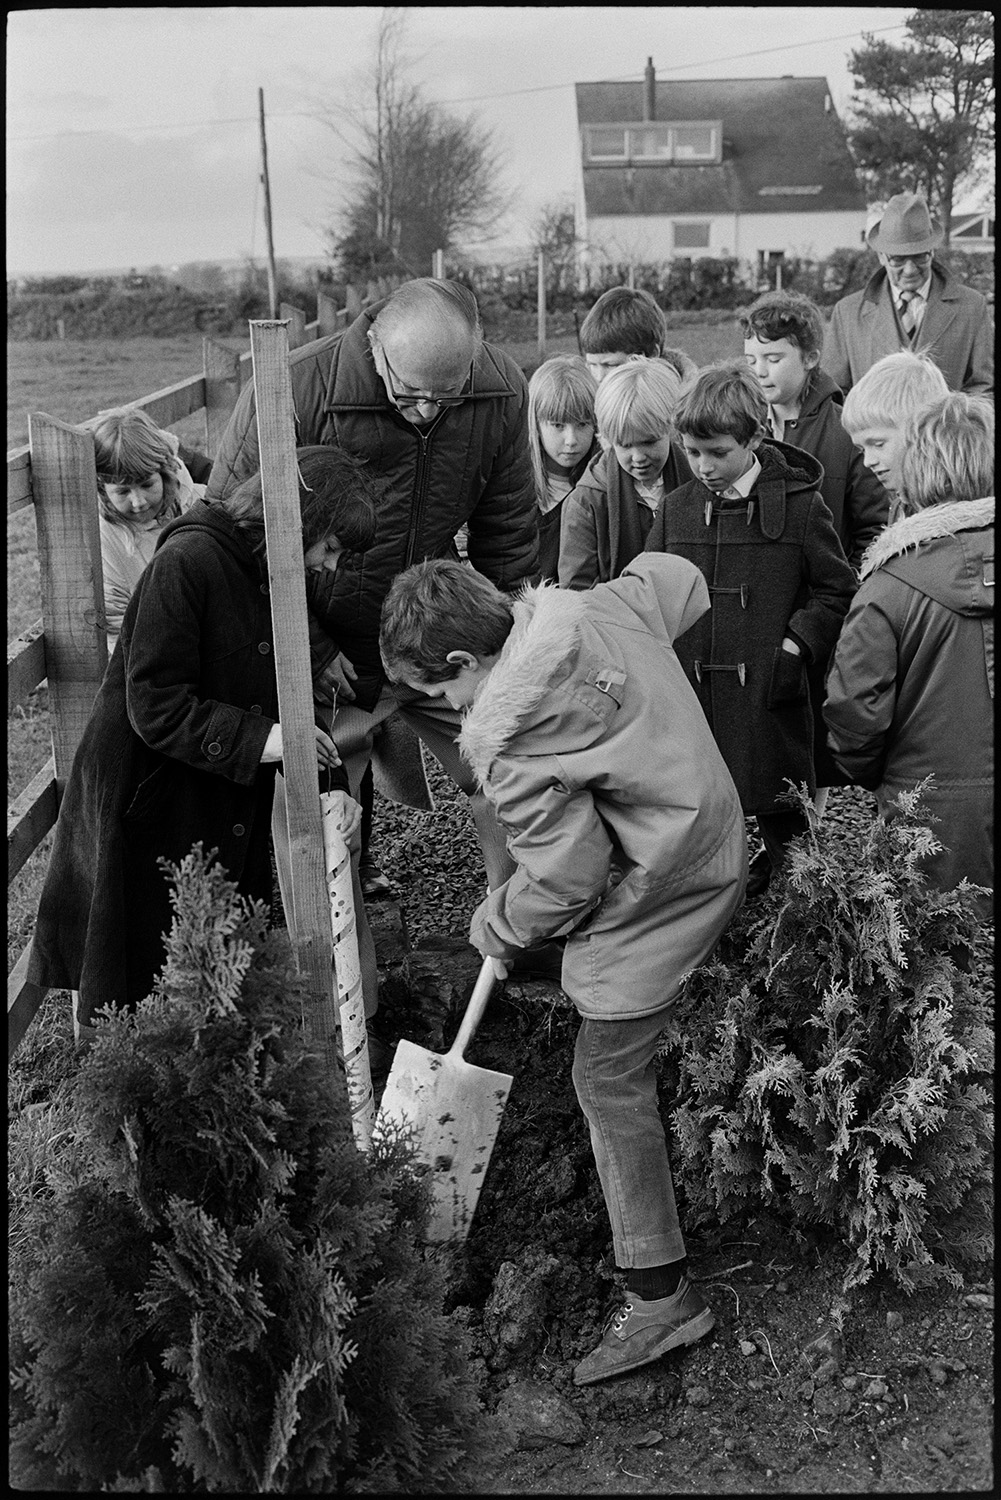 Tree planting ceremony. 
[Tree planting ceremony at the Beaford Centre. A boy is using a spade to dig a hole for the tree. Other children, a woman and a man are looking on.]